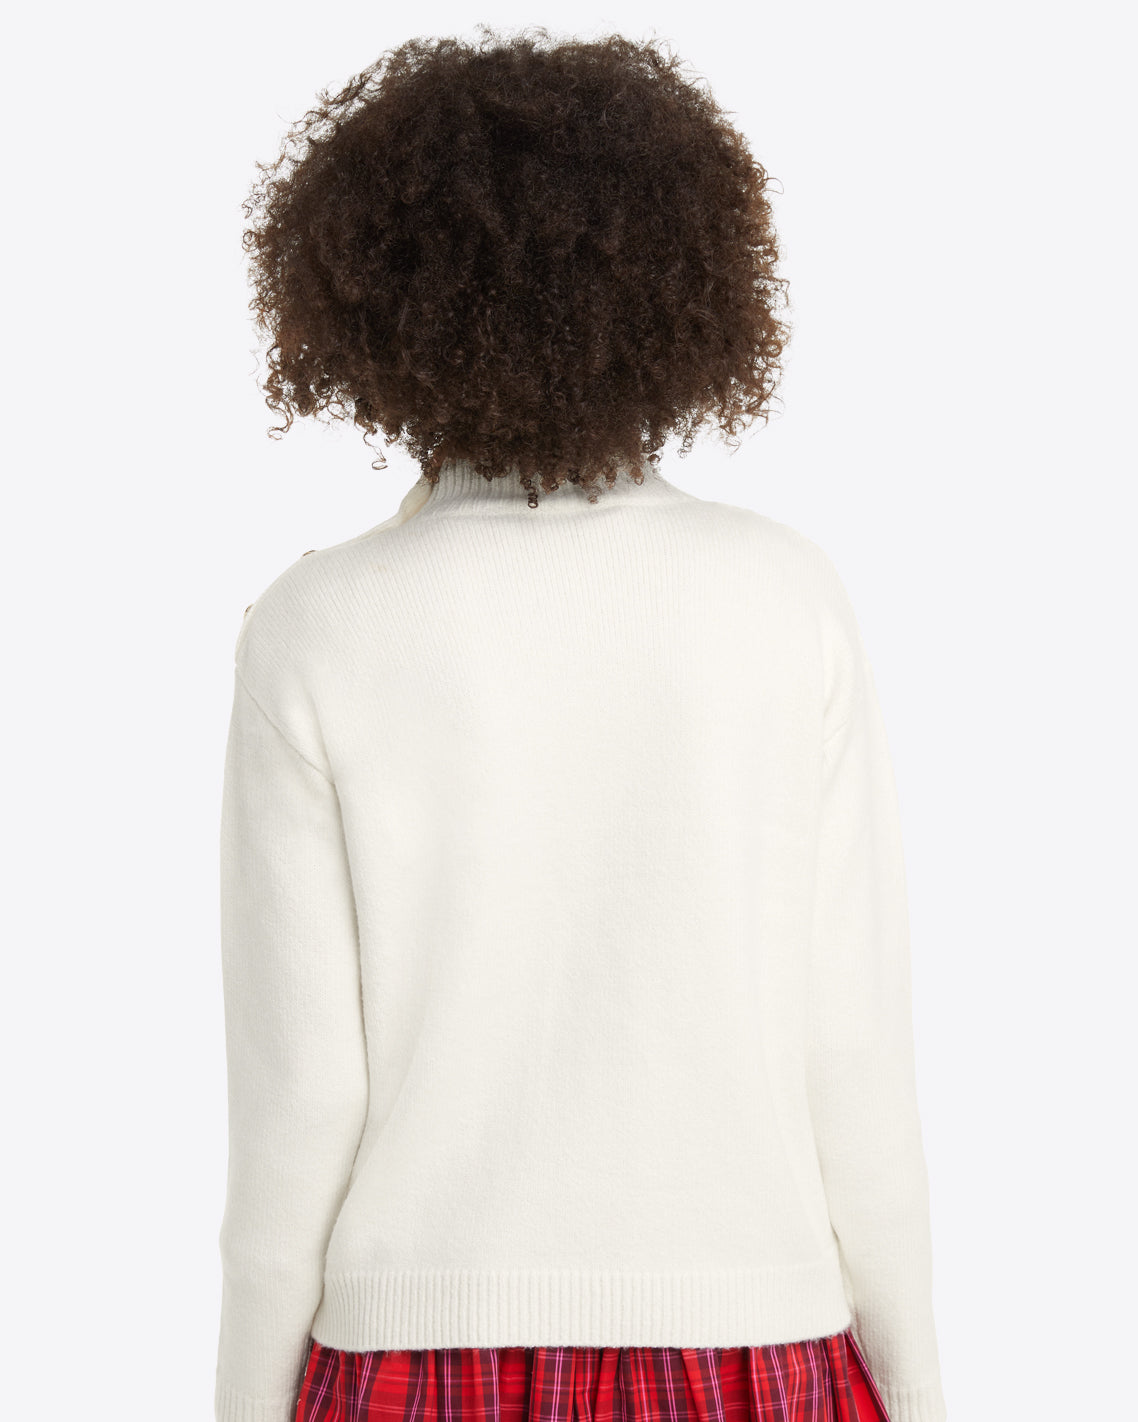 Cableknit Turtleneck Sweater in Magnolia White